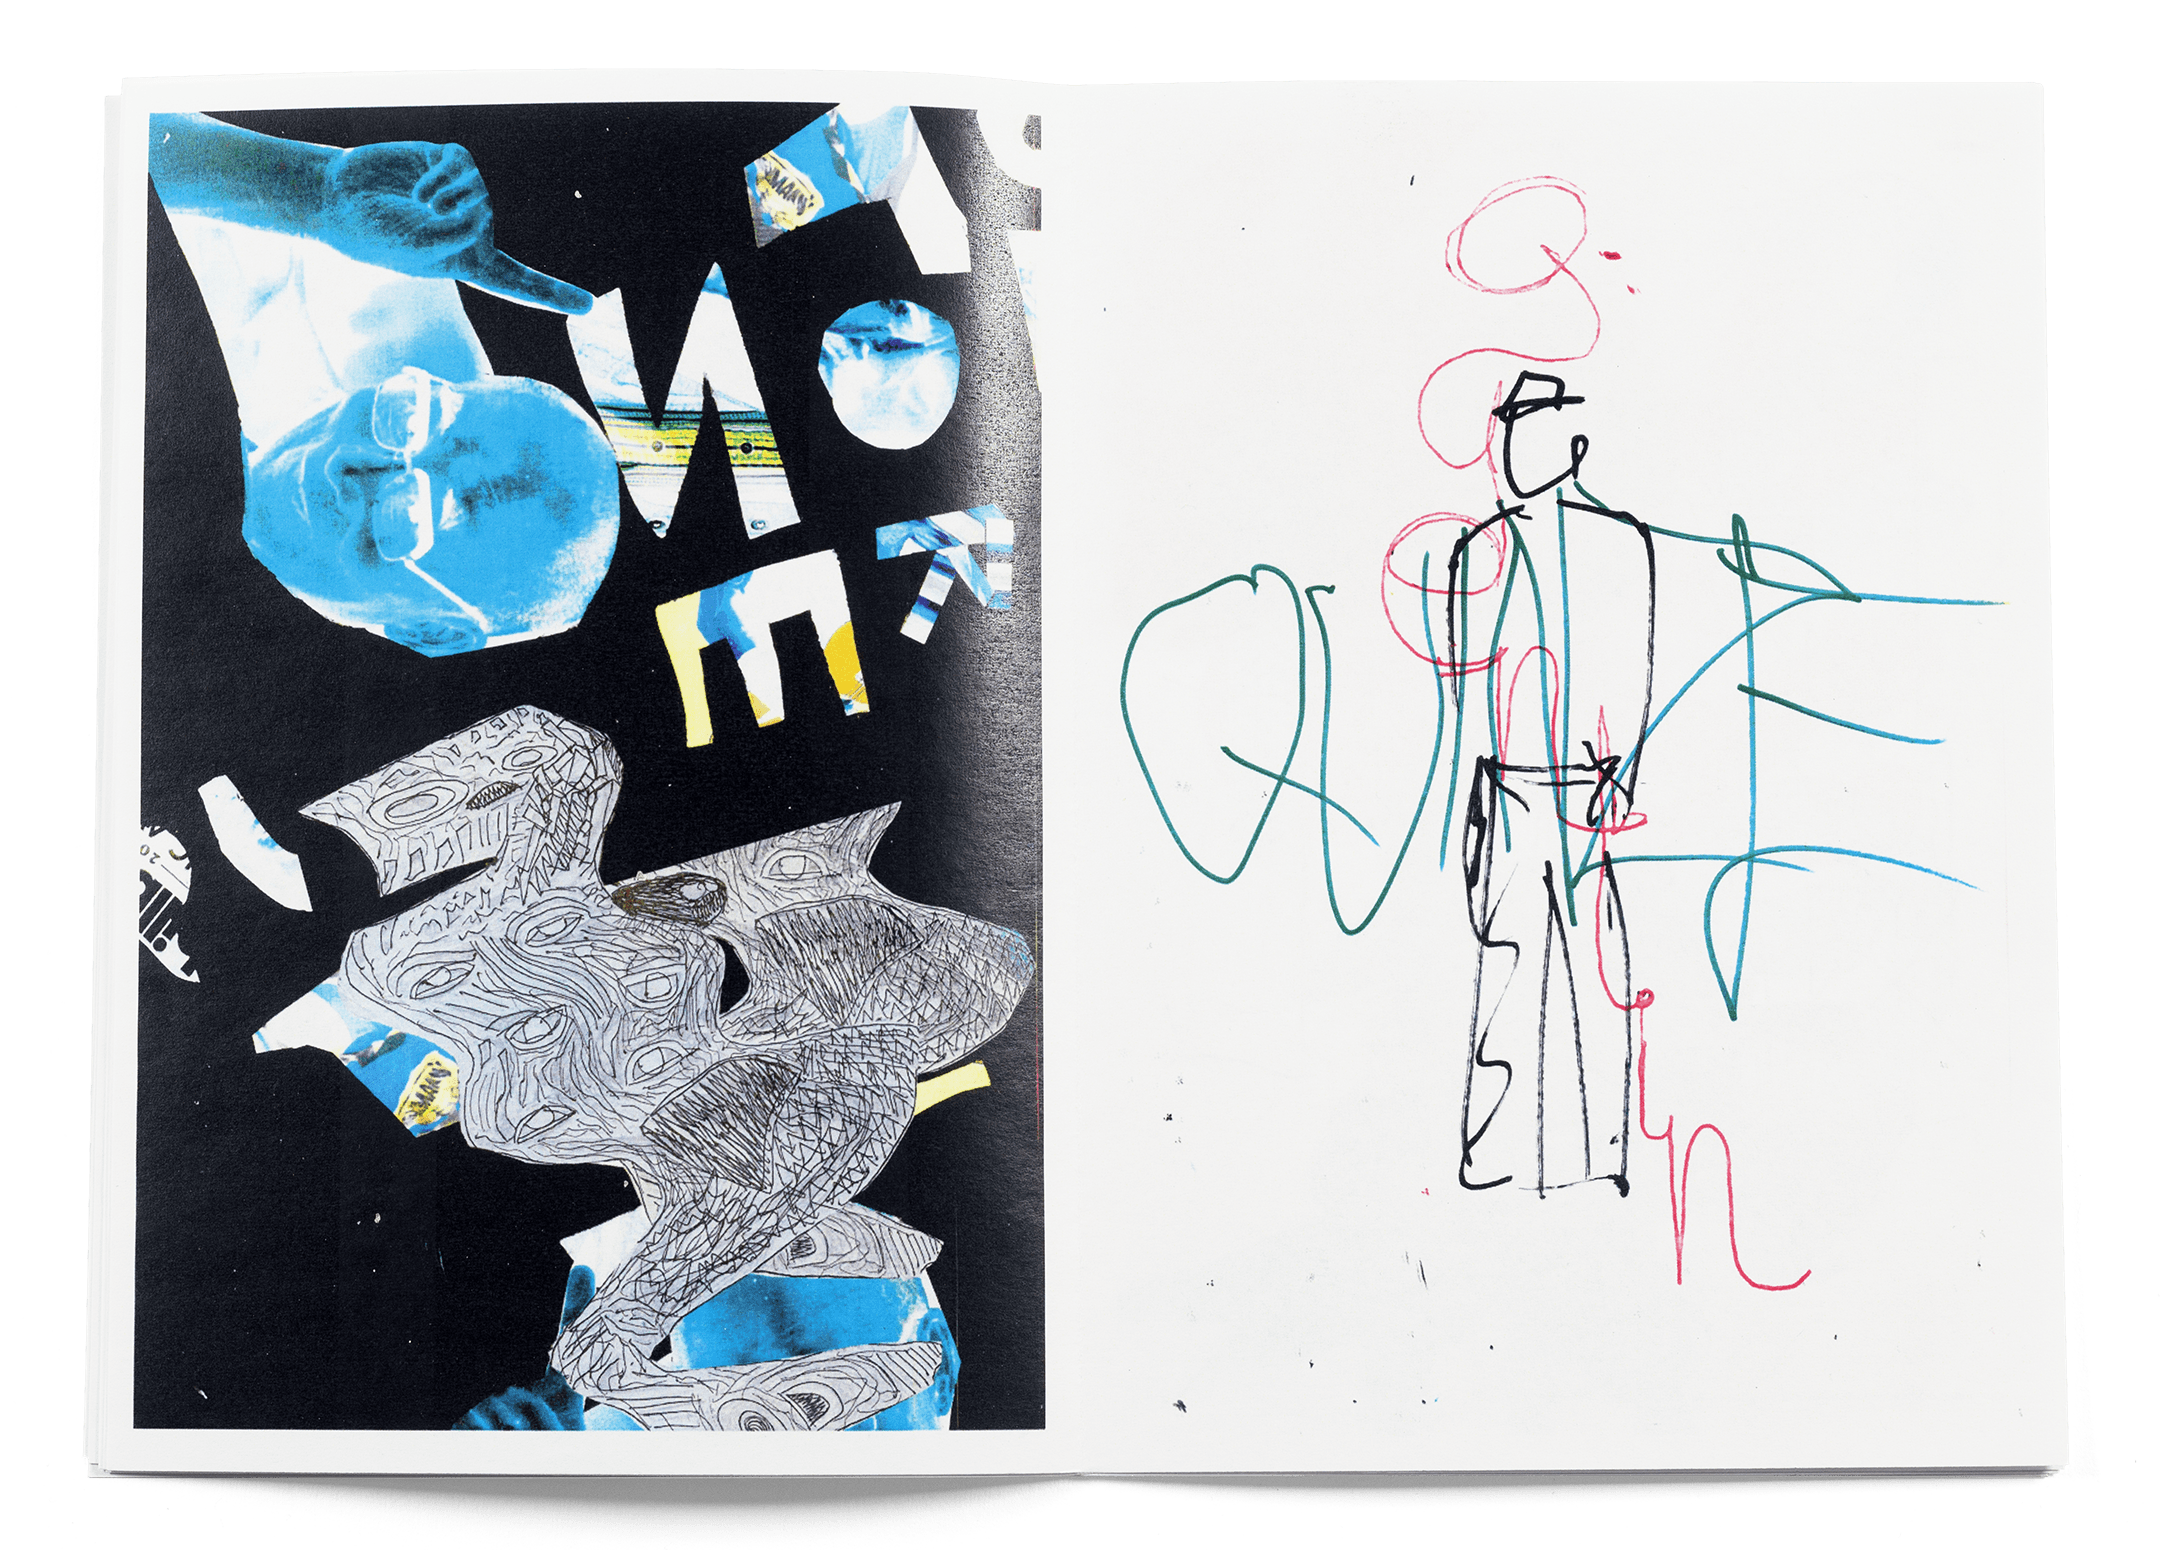 Spread from the brochure made during the “Processus” workshop at Têtard art school, Lausanne